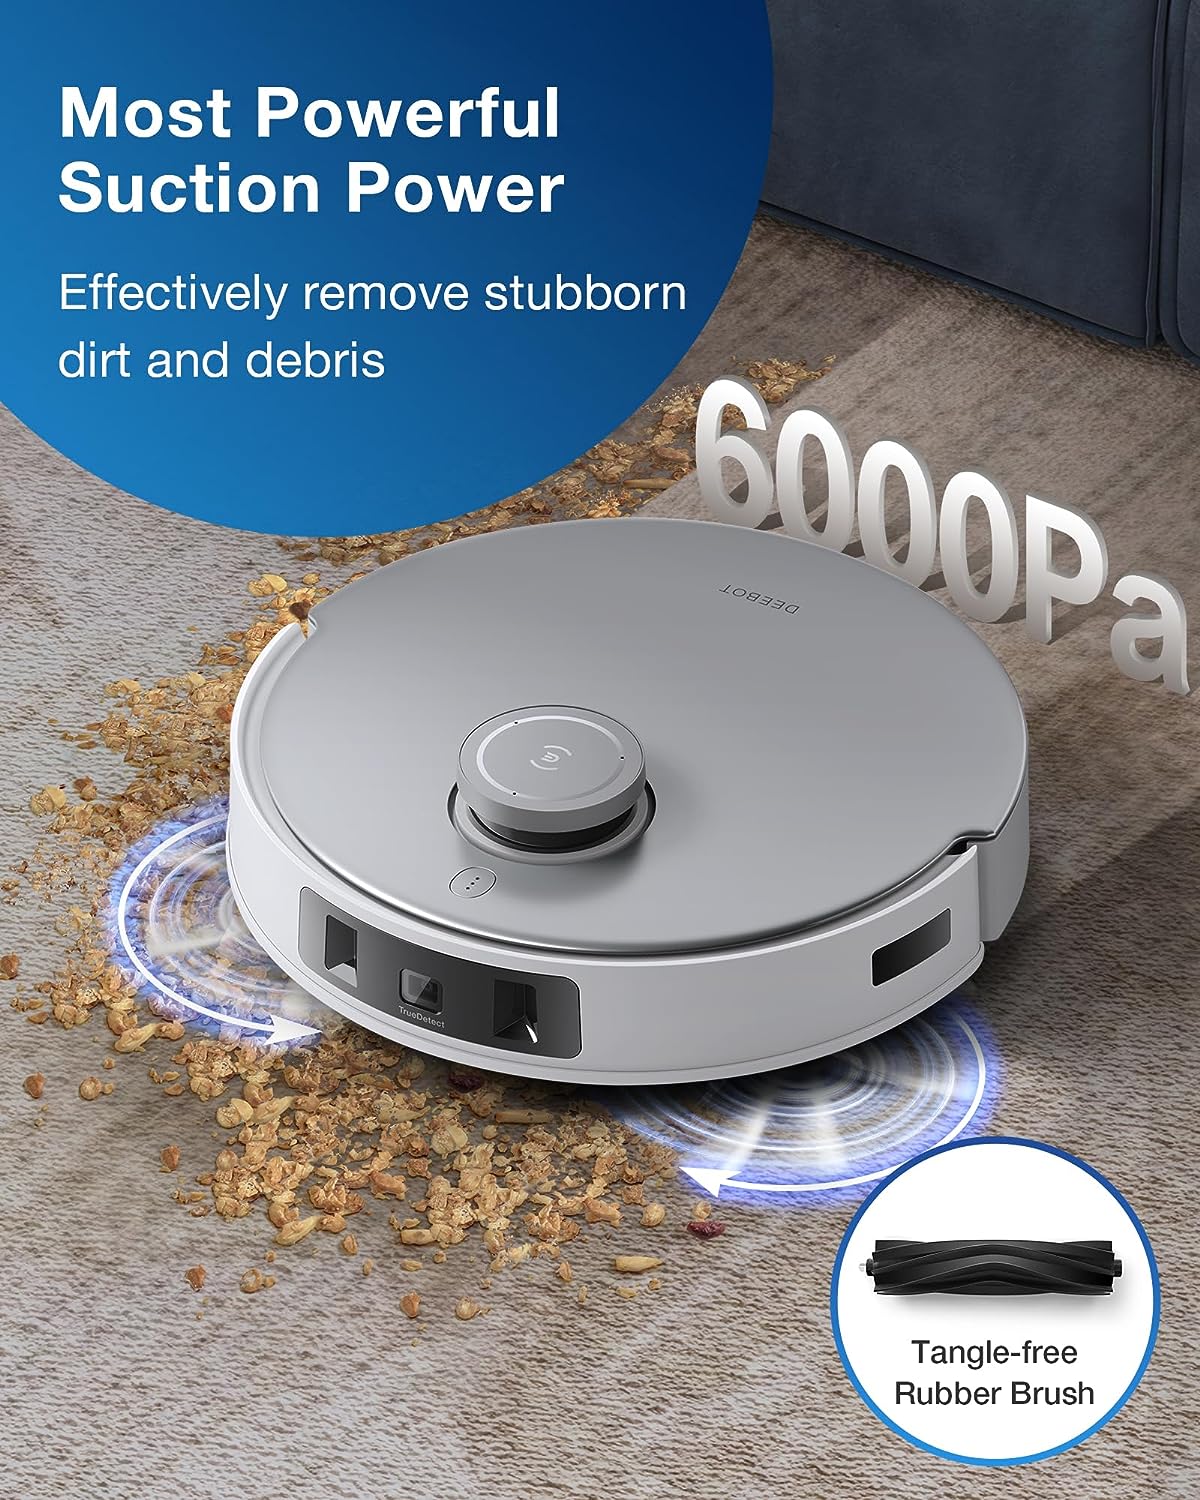 ECOVACS DEEBOT T20 Omni Robot Vacuum and Mop, Hot Water Mop Washing, Self-Emptying, Hot Air Drying, 6000Pa Suction, OZMO Turbo Spinning Mop with Auto Mop Lift, Obstacle Avoidance, YIKO Voice Assistant